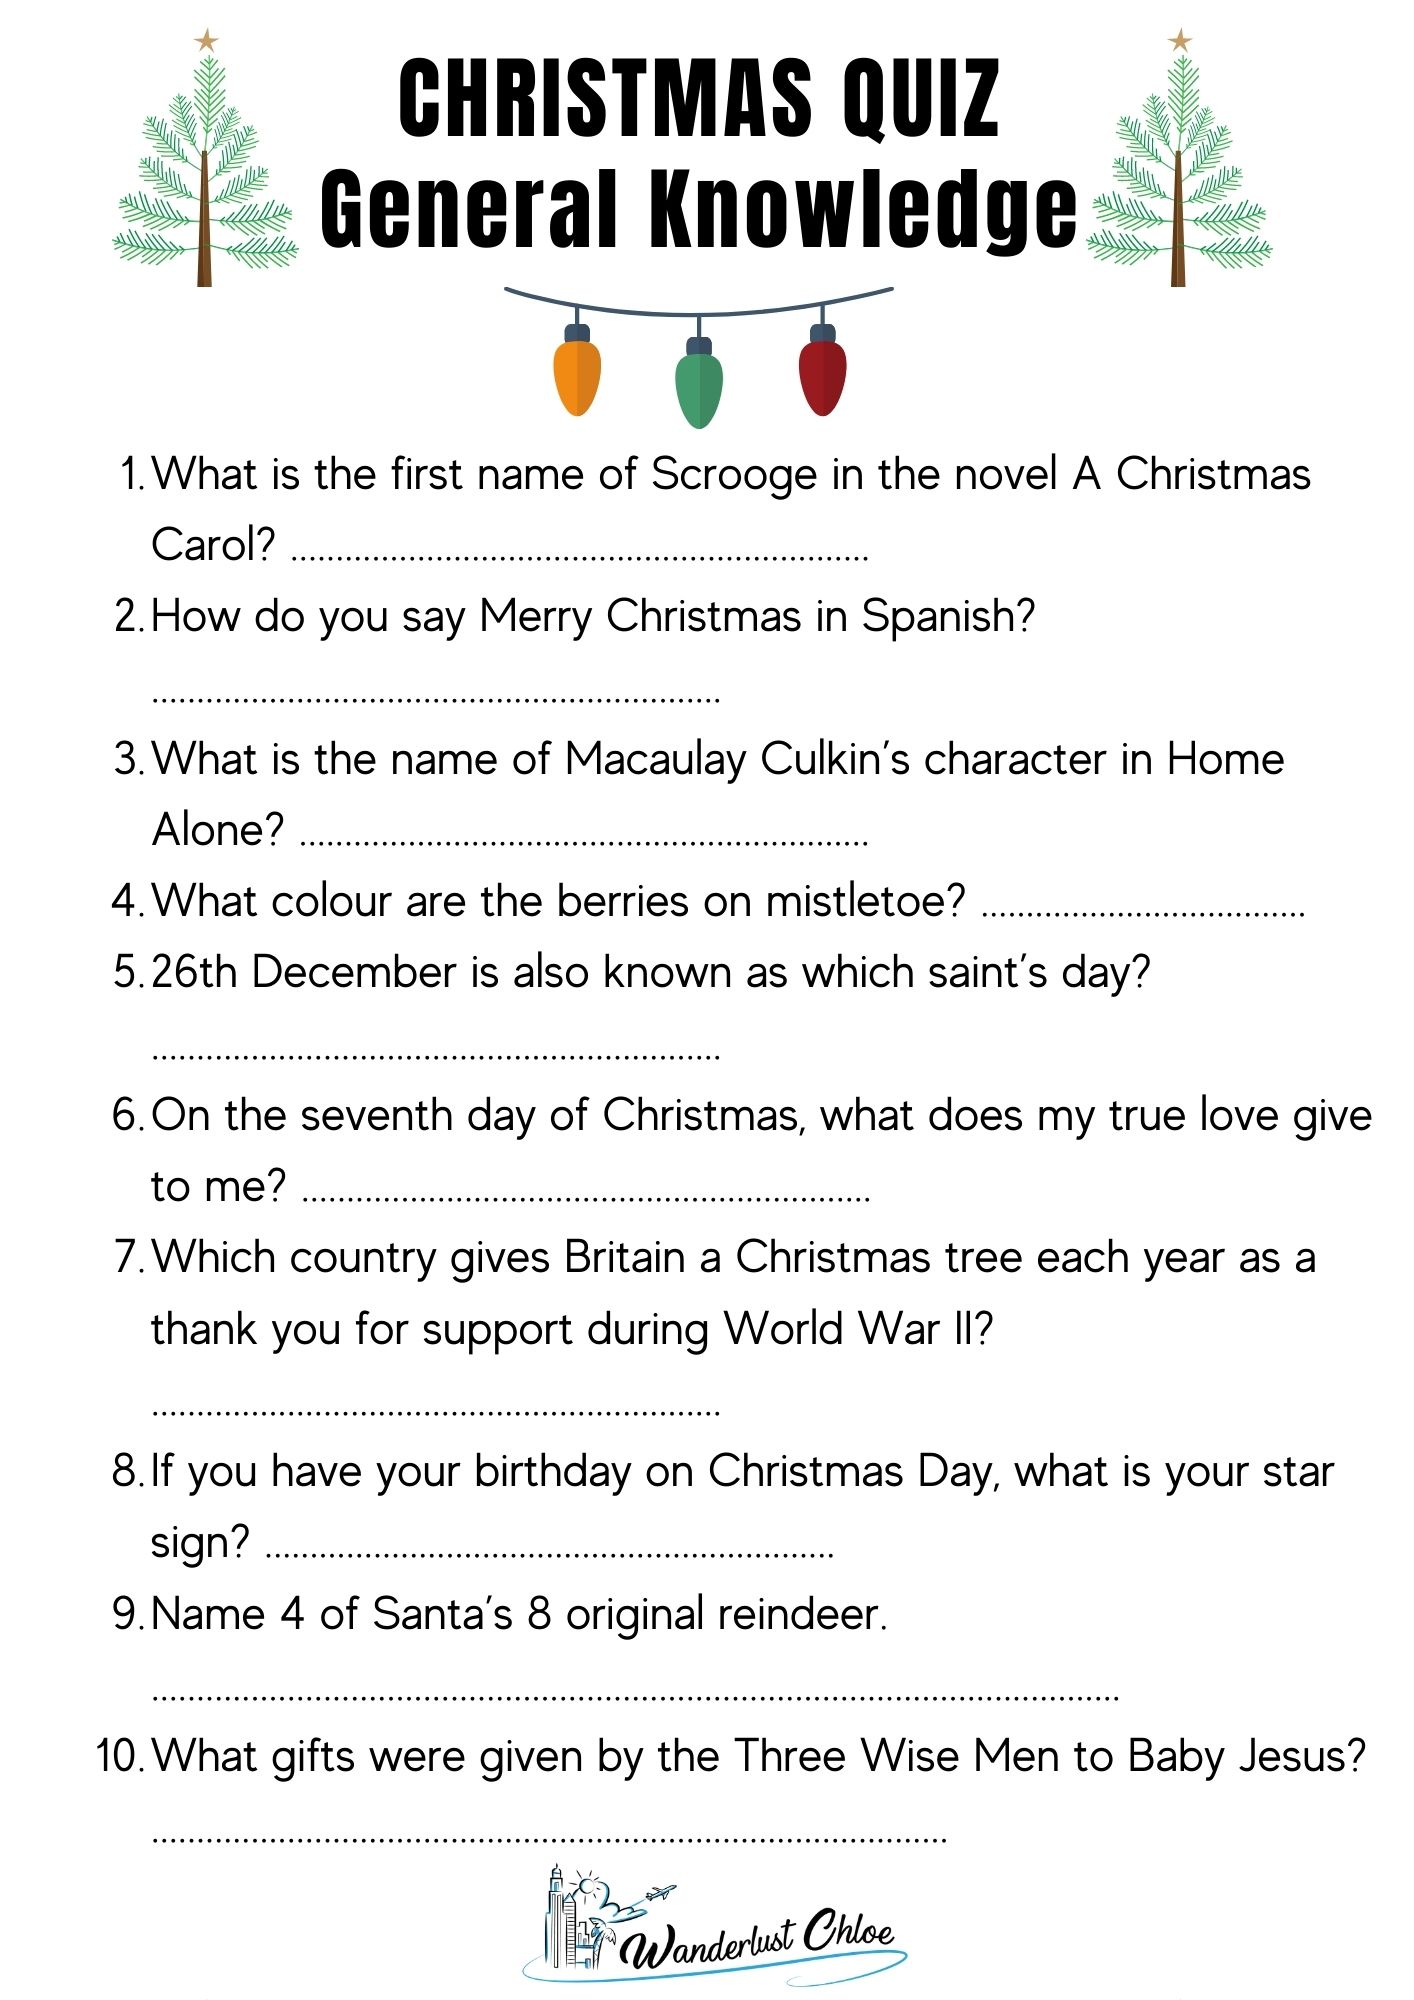 50-christmas-quiz-questions-printable-image-rounds-solutions-2020